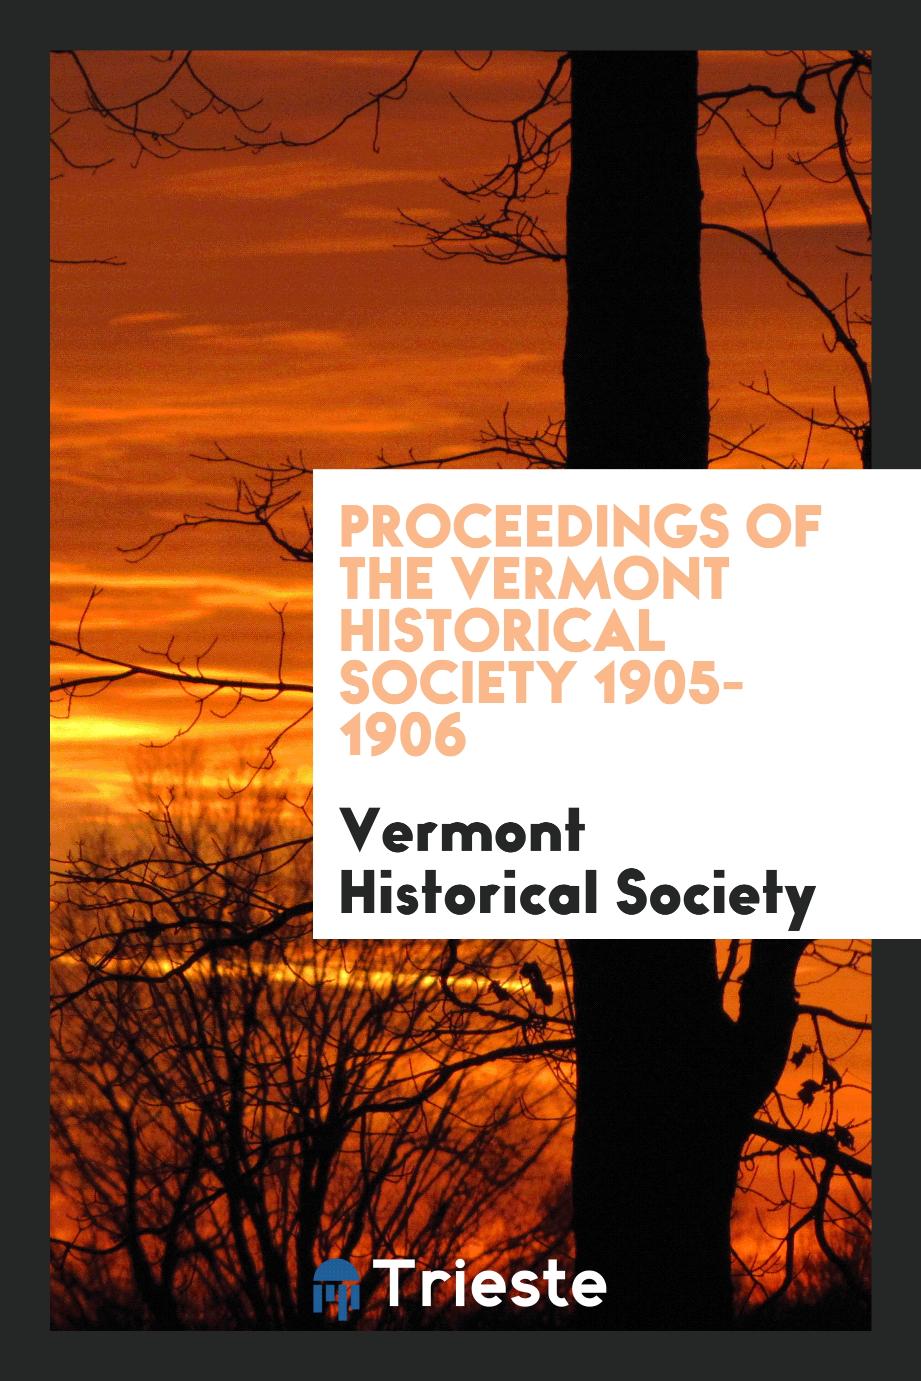 Proceedings of the Vermont historical society 1905-1906